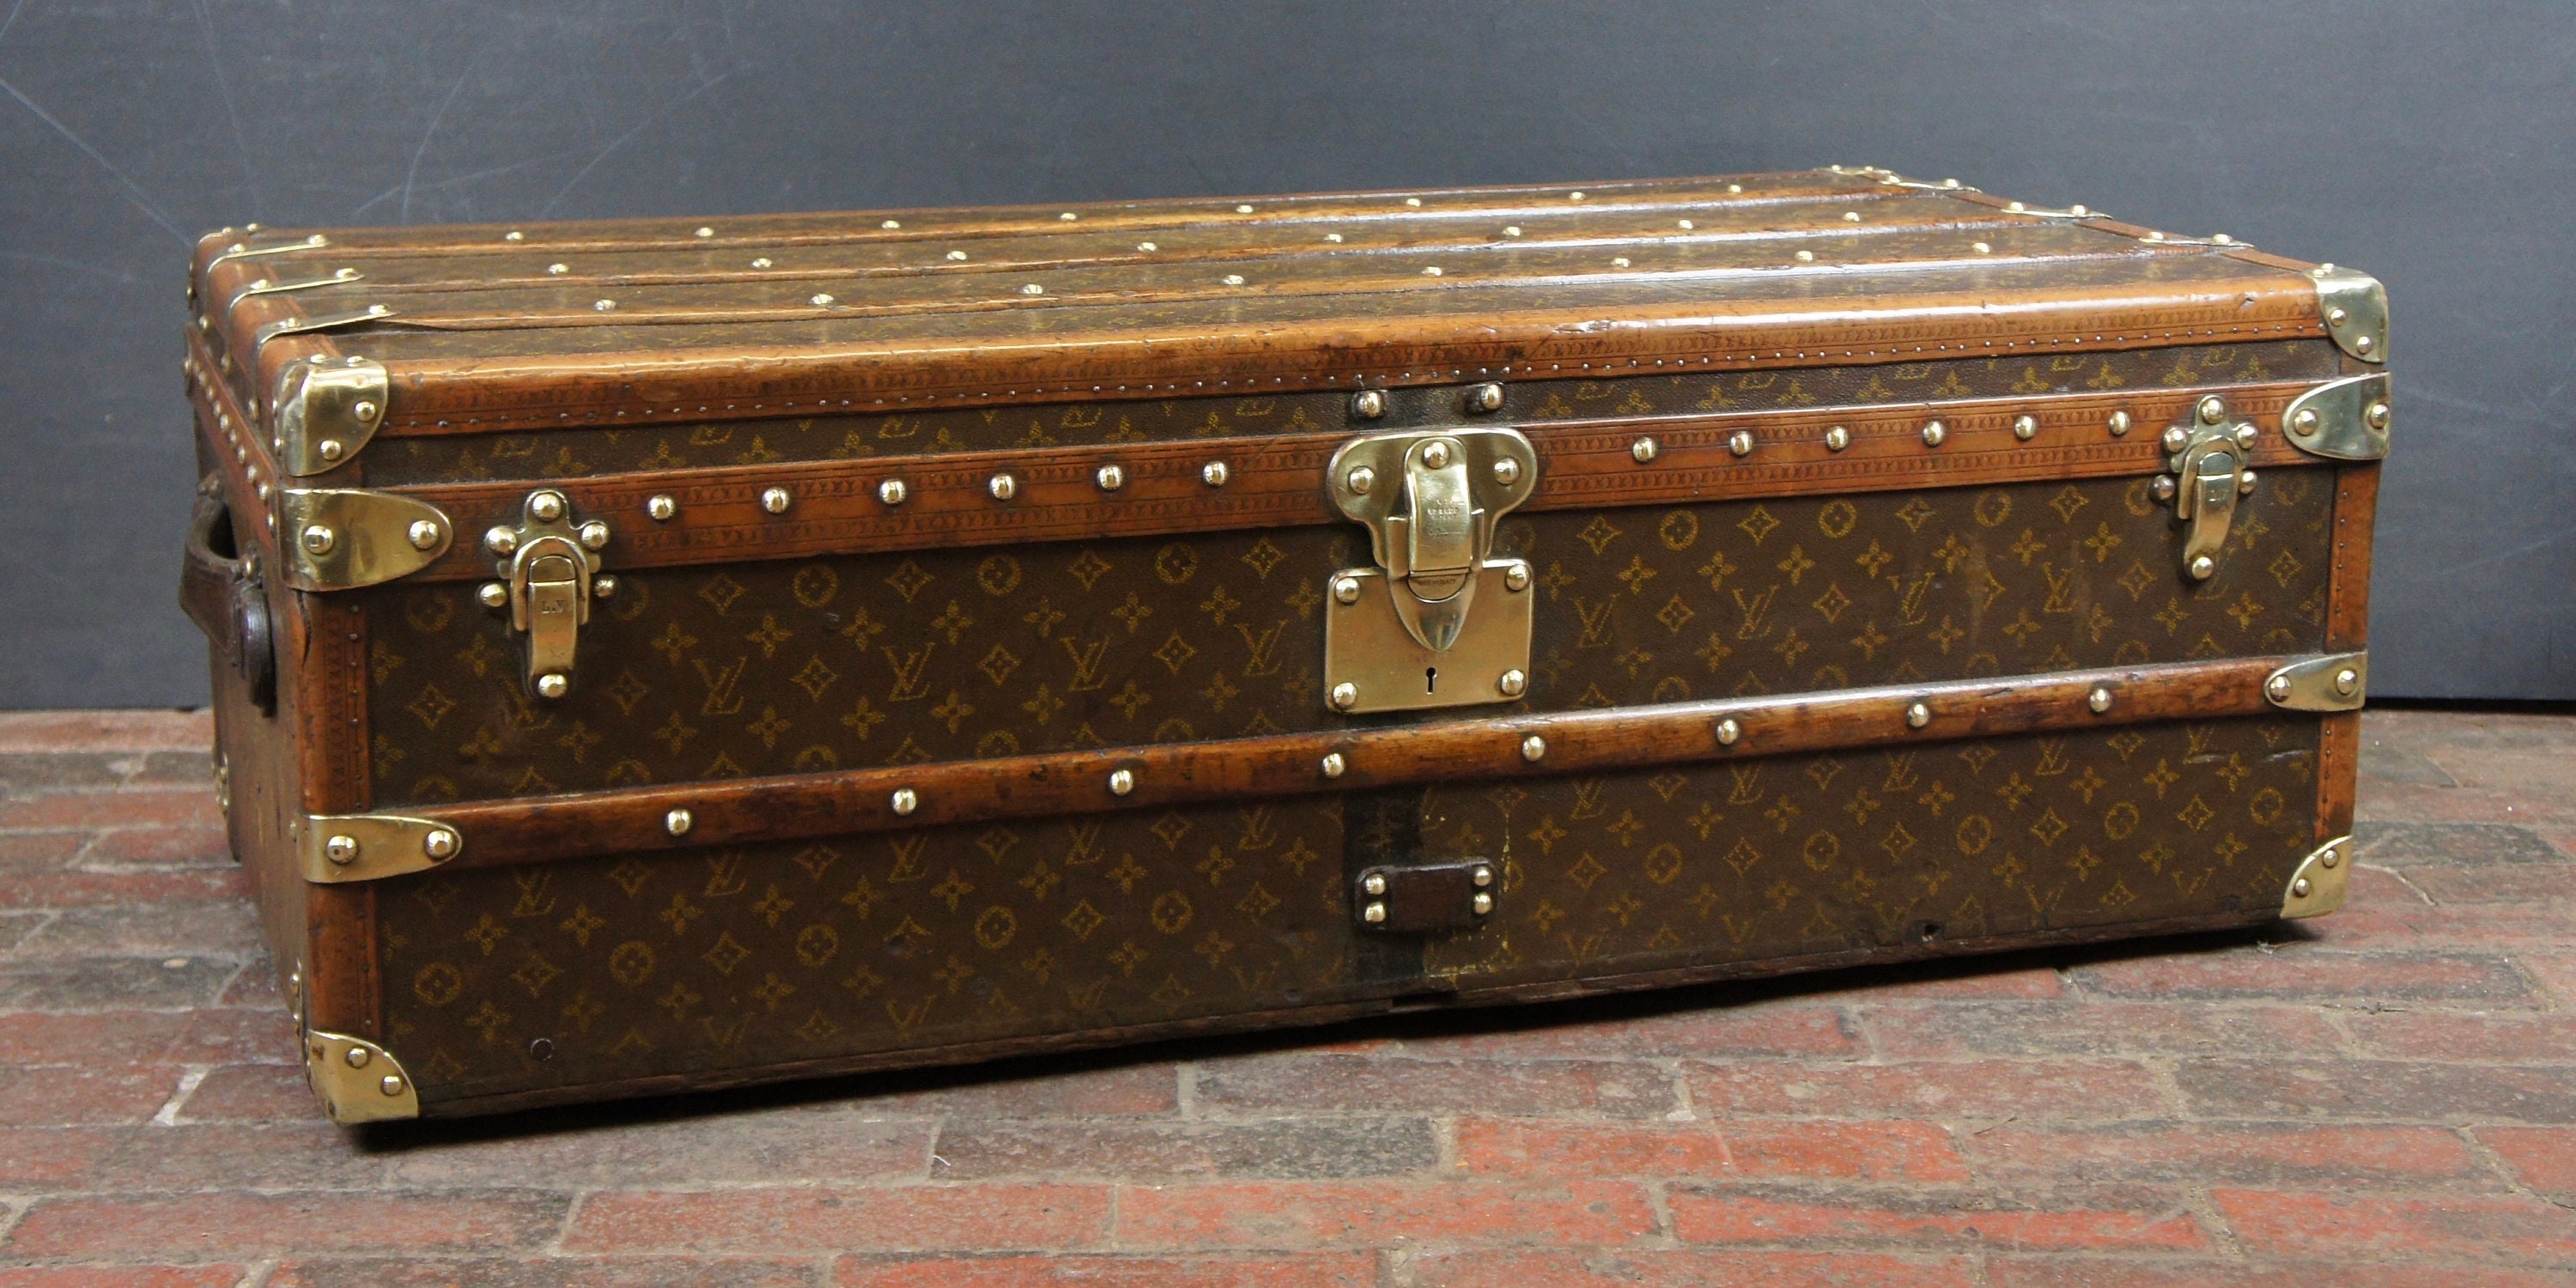 Old Louis Vuitton travel trunk 1920 with monogram - THE HOUSE OF WAUW